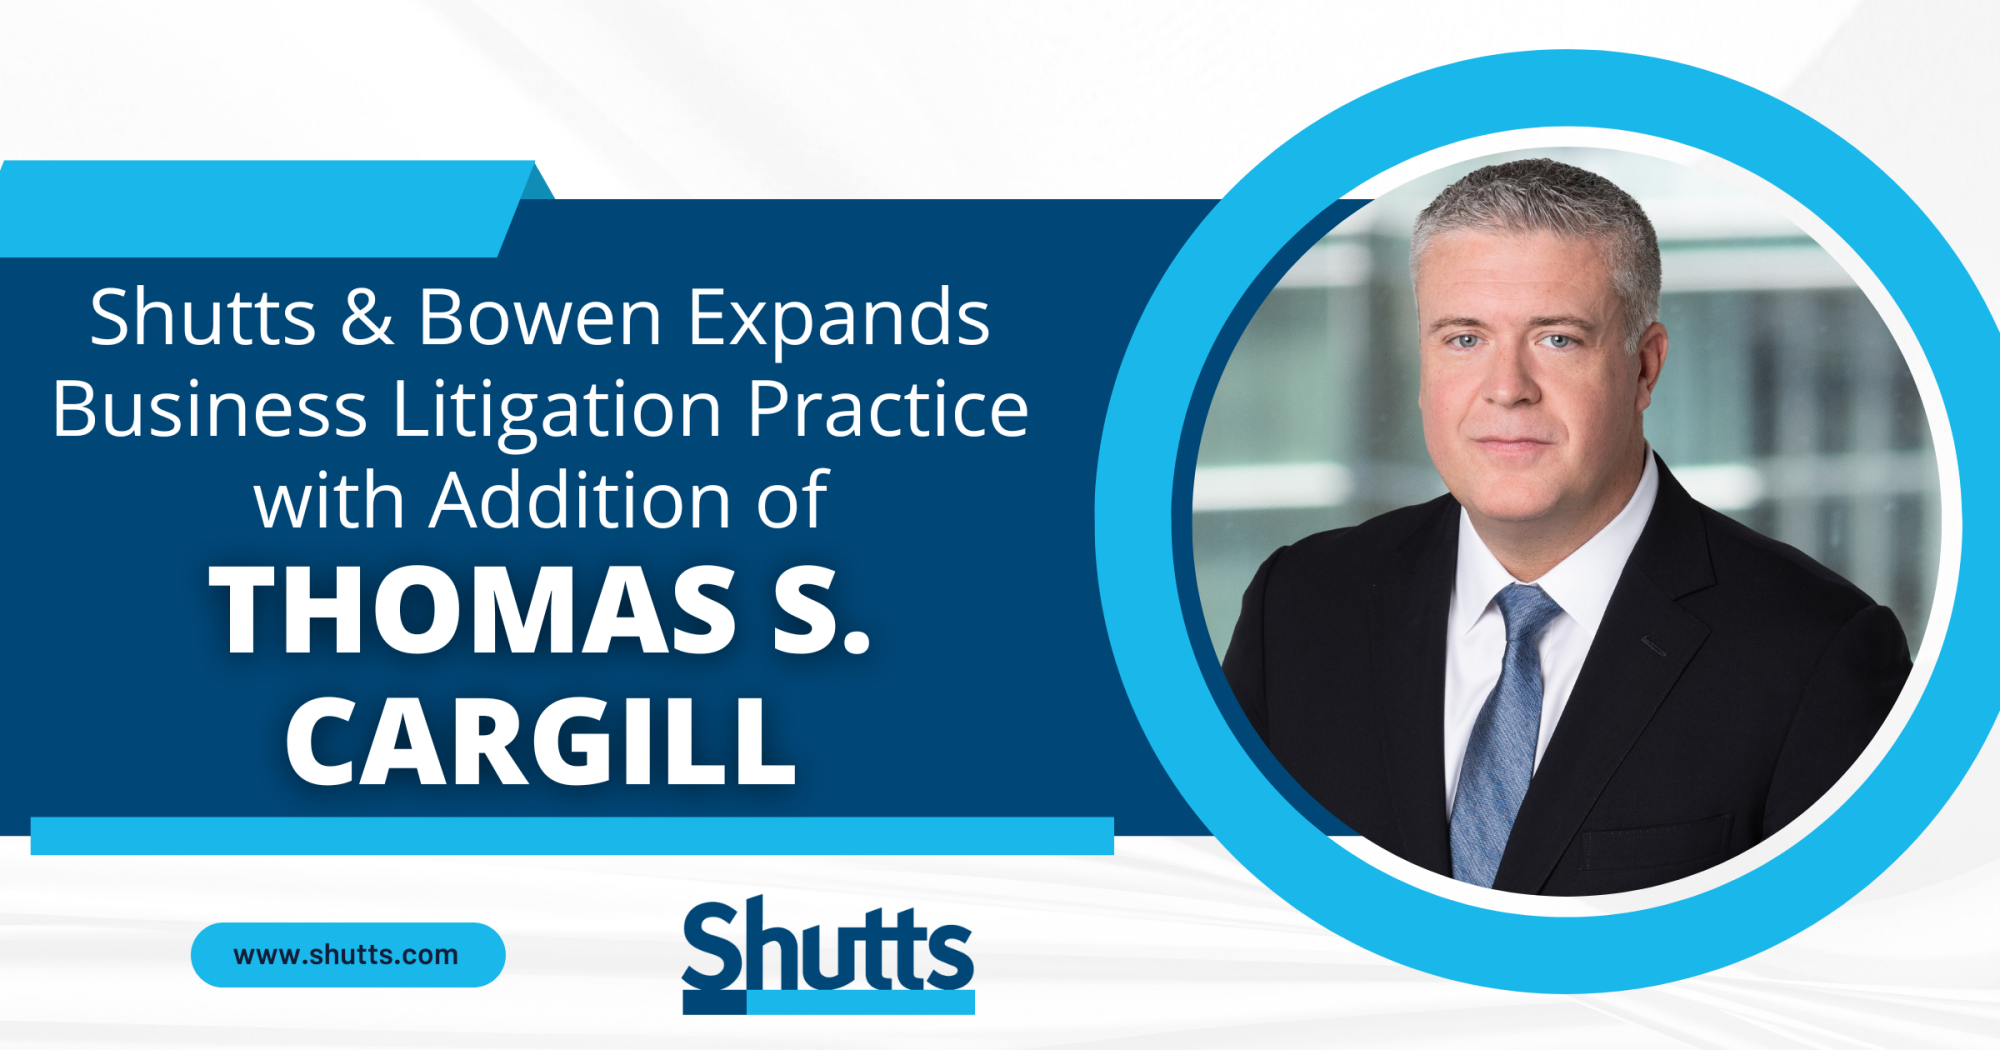 Shutts & Bowen Expands Business Litigation Practice with Addition of Thomas S. Cargill